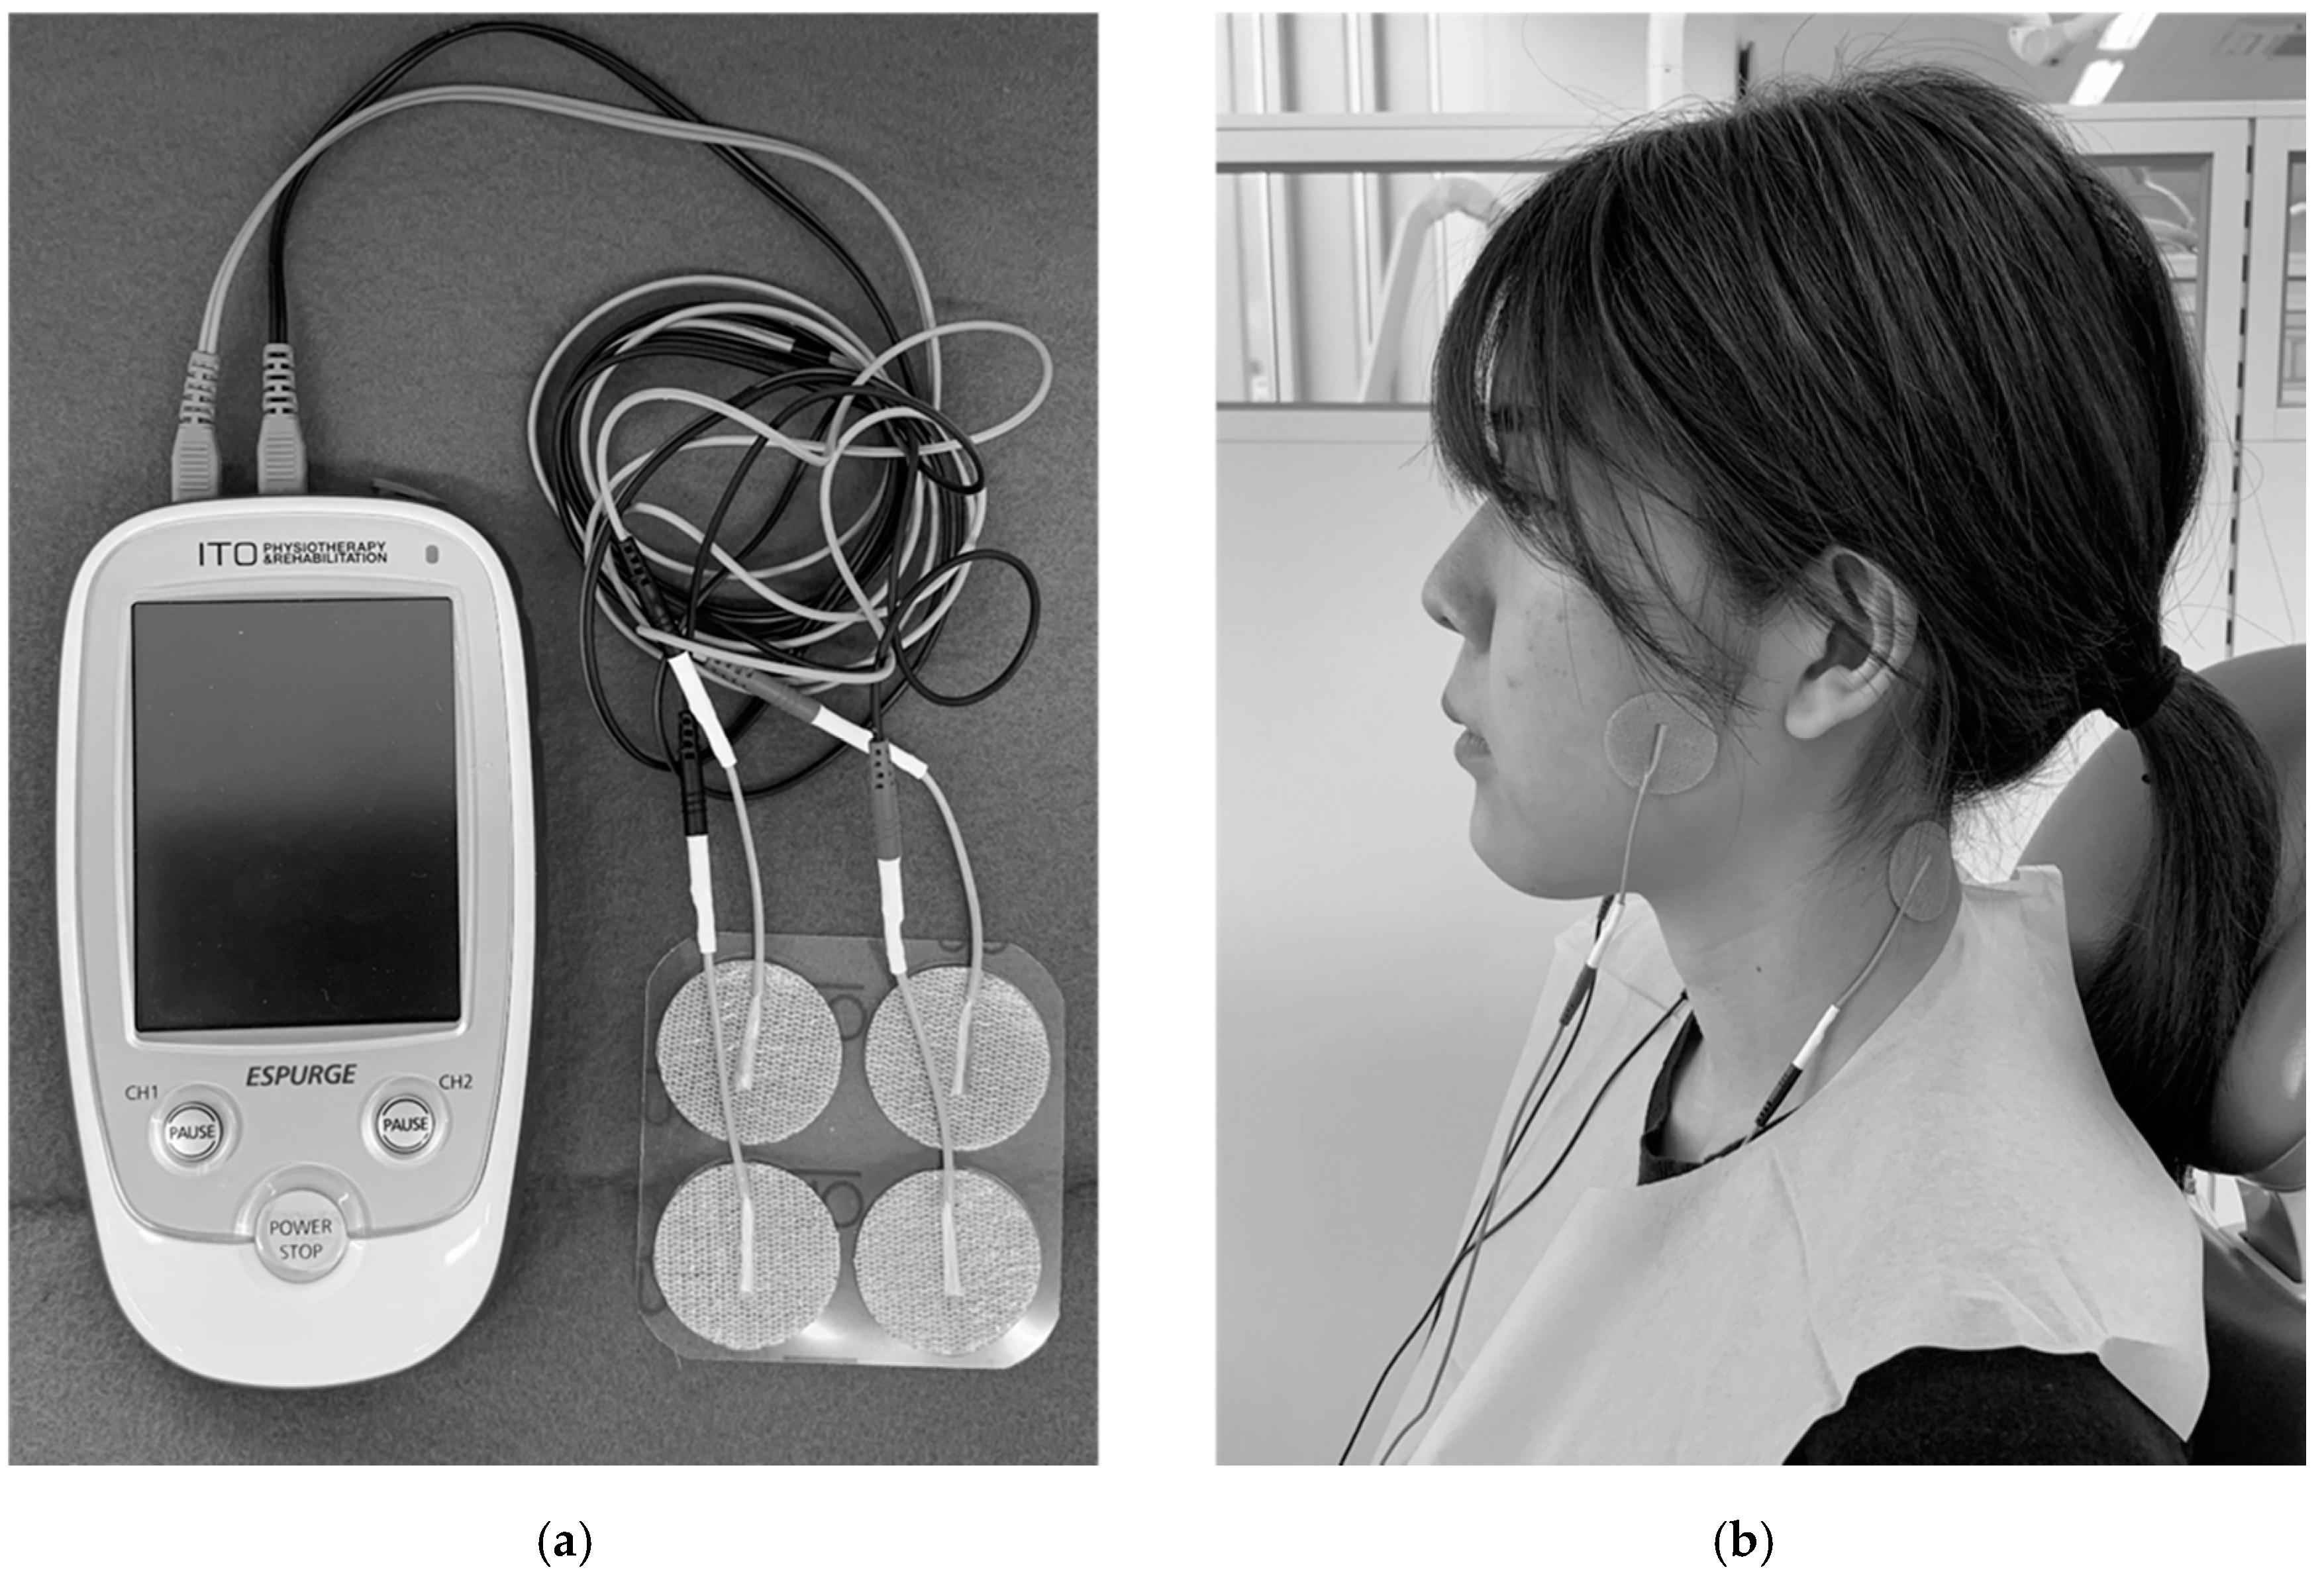 Transcutaneous electrical nerve stimulation (TENS) therapy - Emotions Market